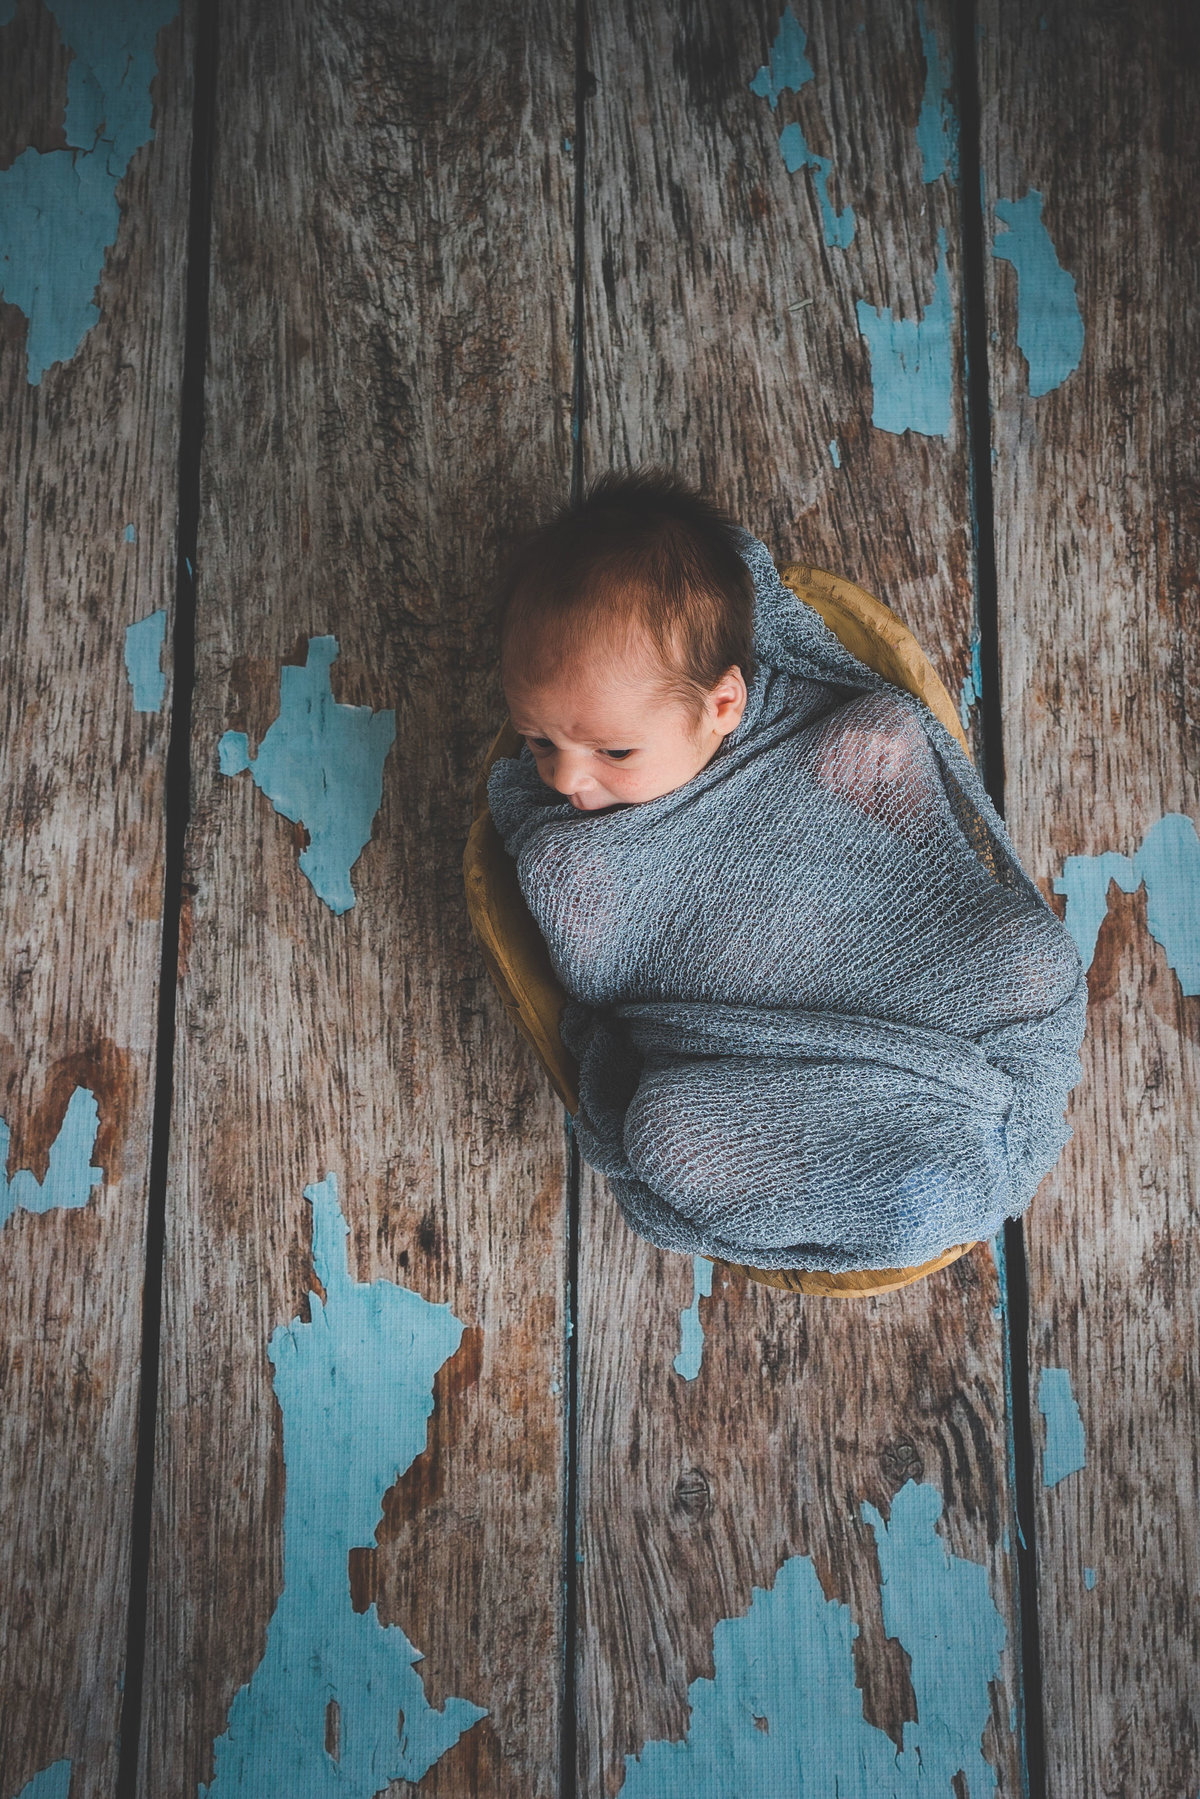 Newborn photography of baby wrapped in cheesecloth blanket in a bowl in a wooden floor.